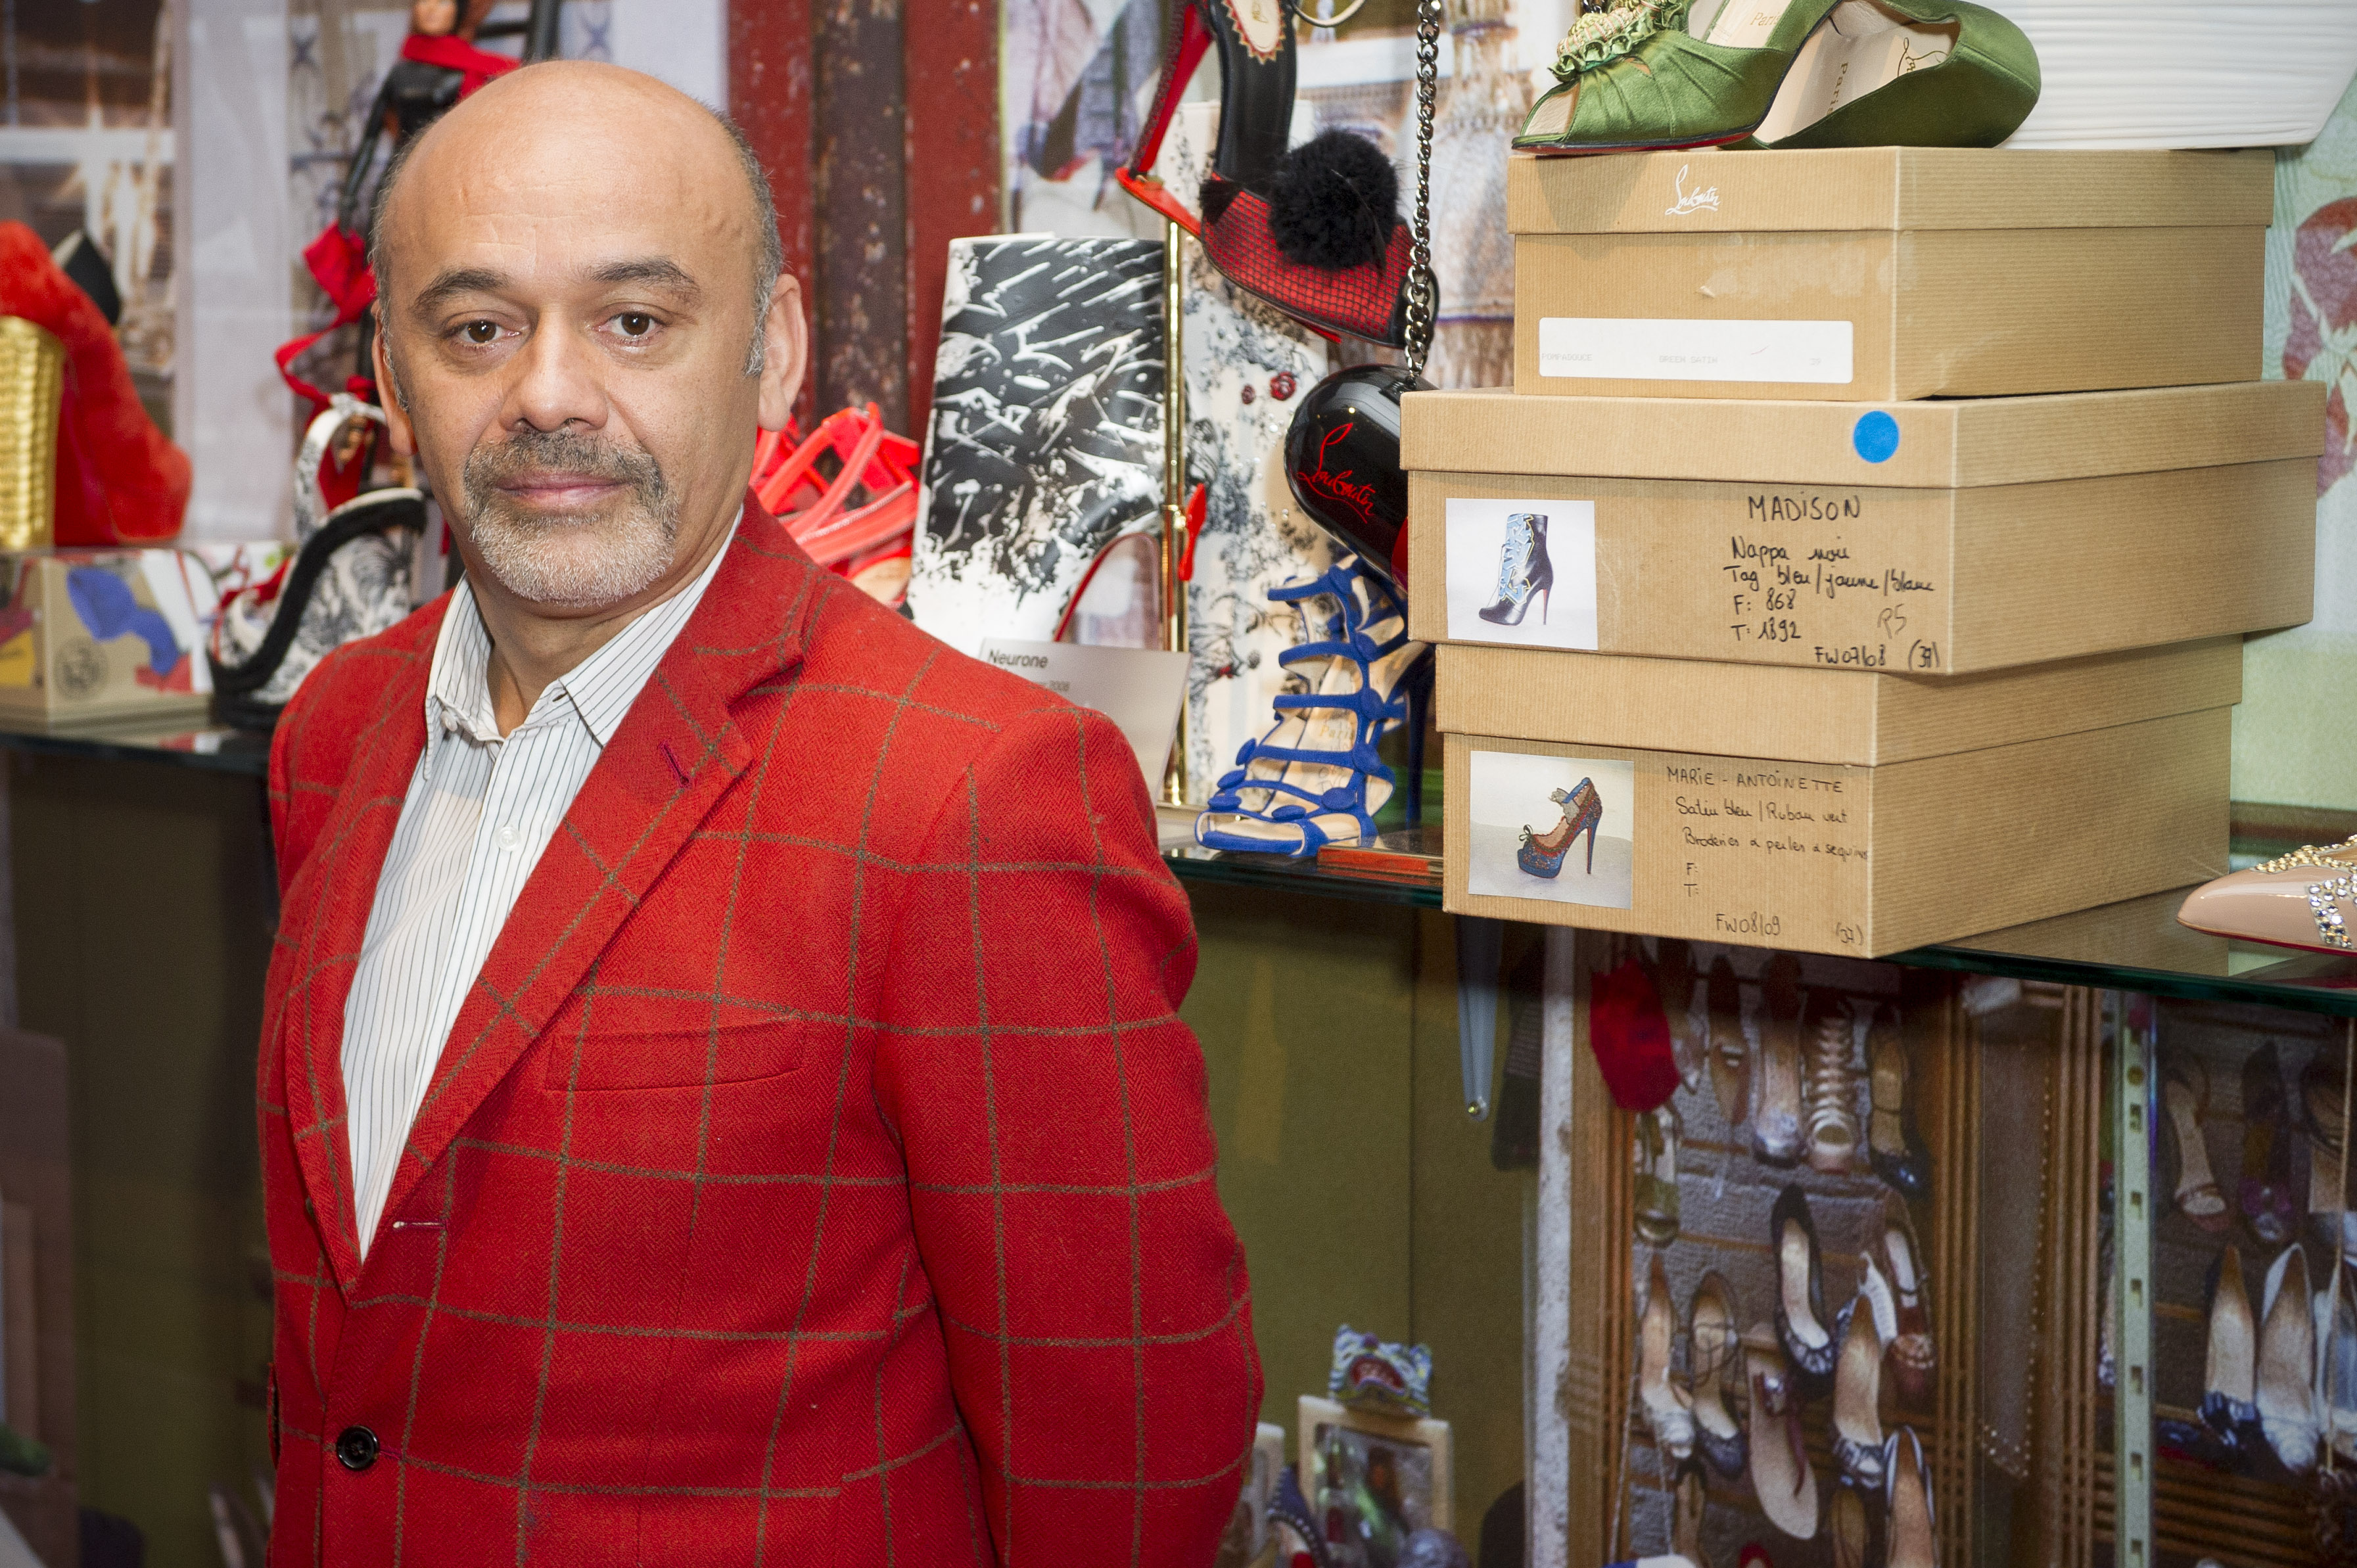 Louboutins are known for their red soles. - CultureMap Austin